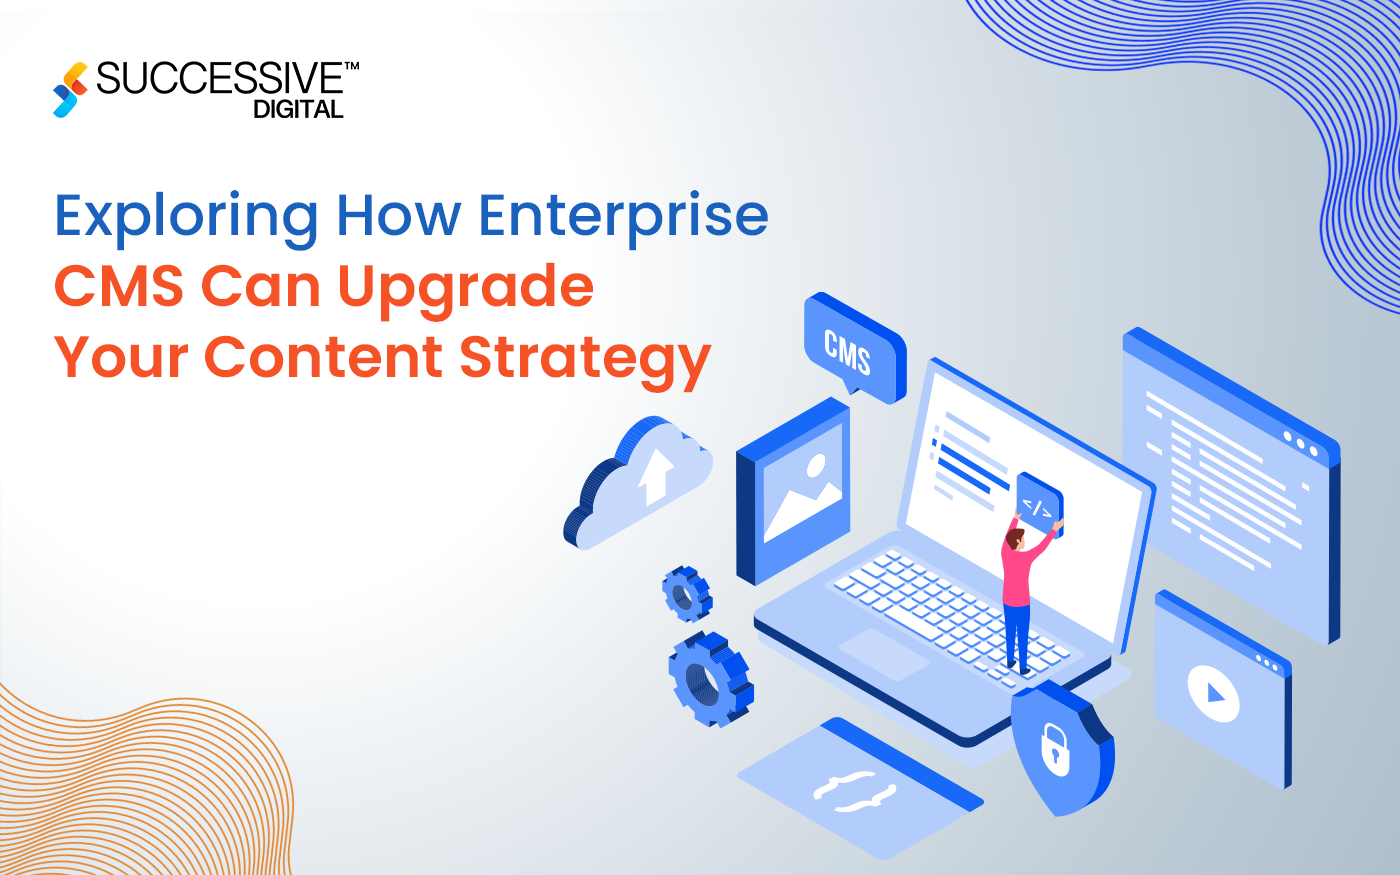 Enhancing Digital Experiences: Exploring How Enterprise CMS Can Upgrade Your Content Strategy